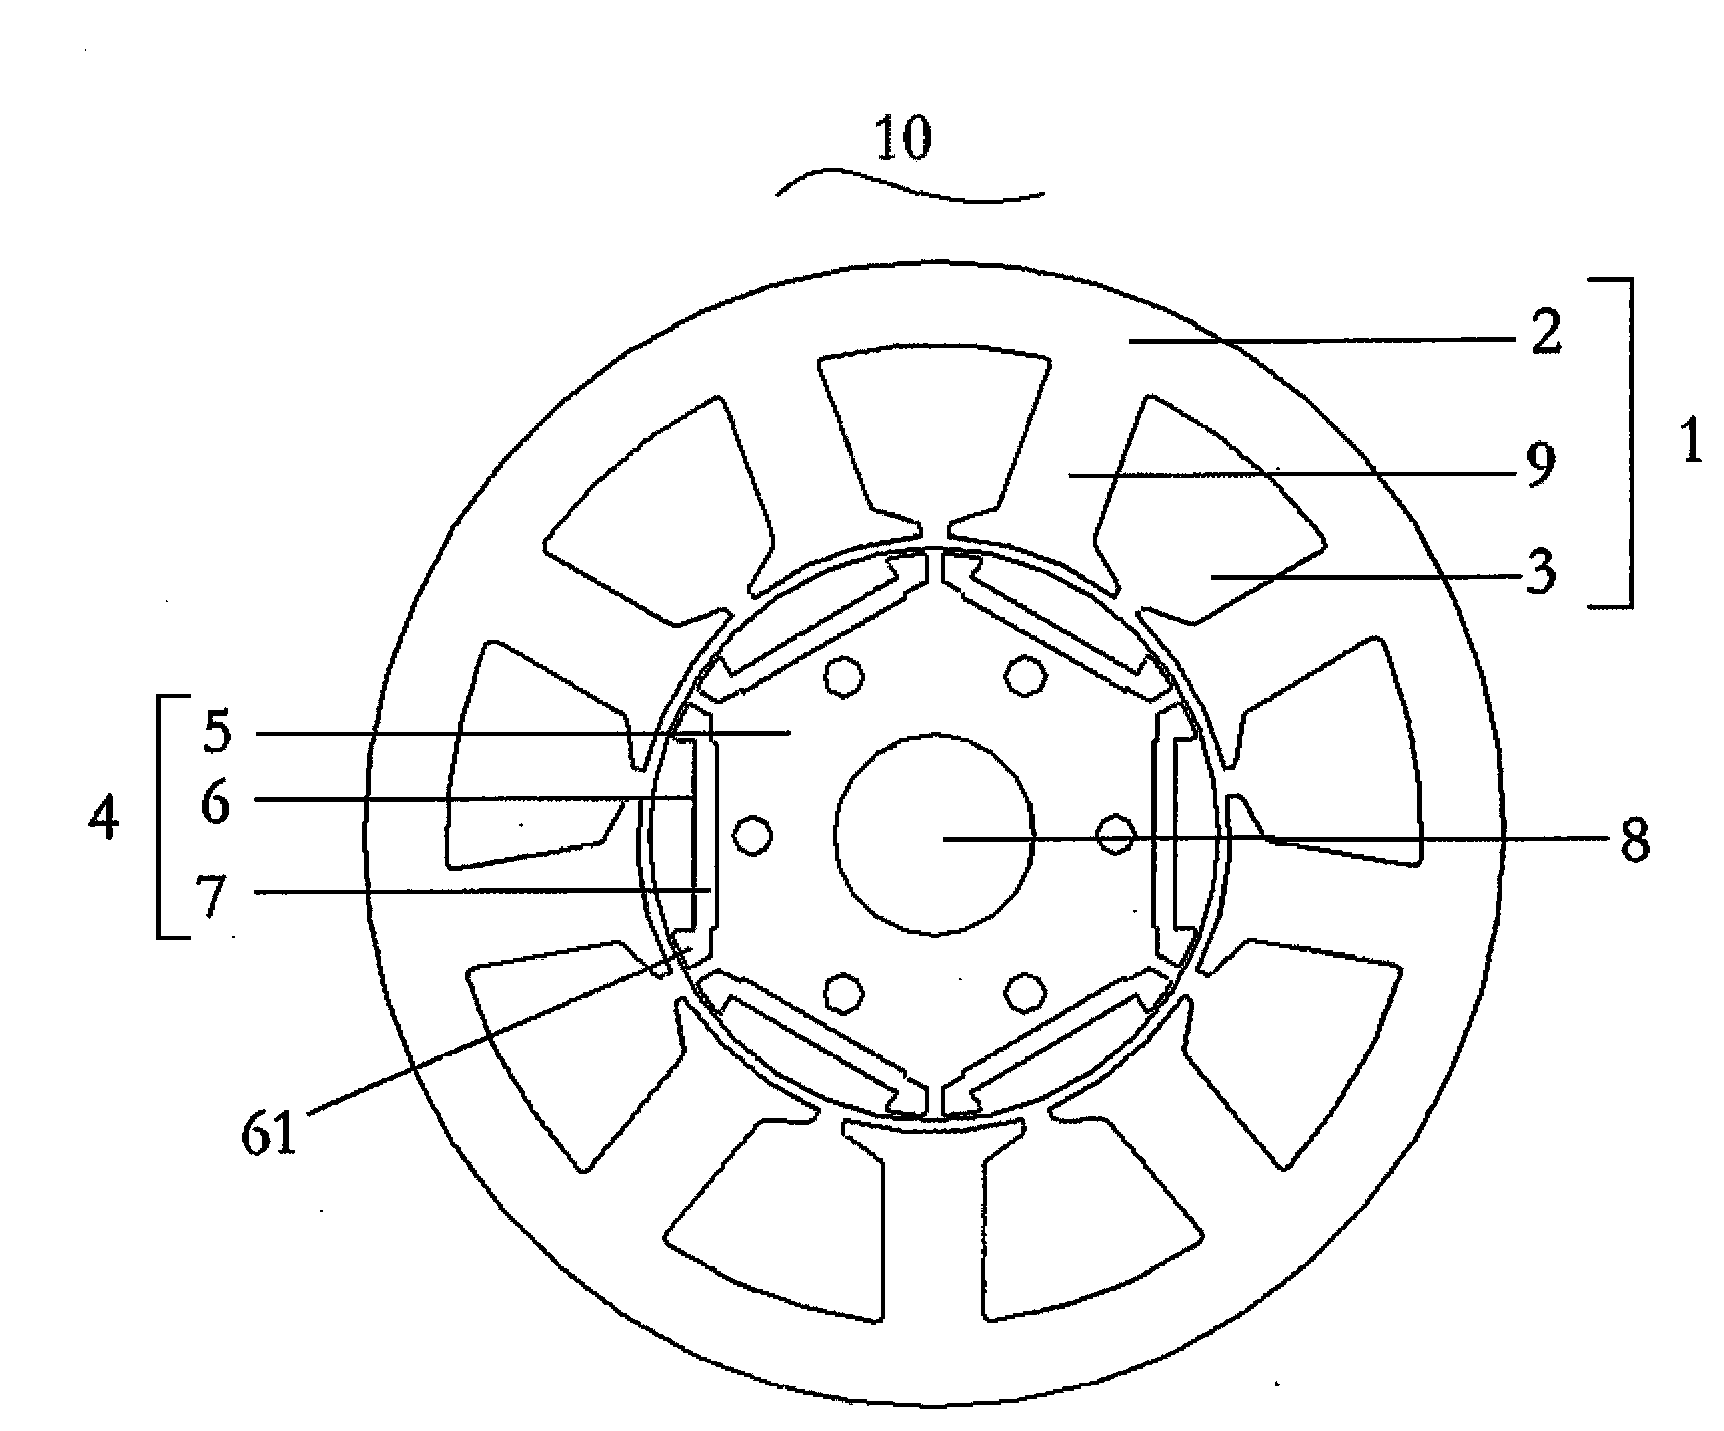 Rotor, built-in permanent magnet motor and compressor